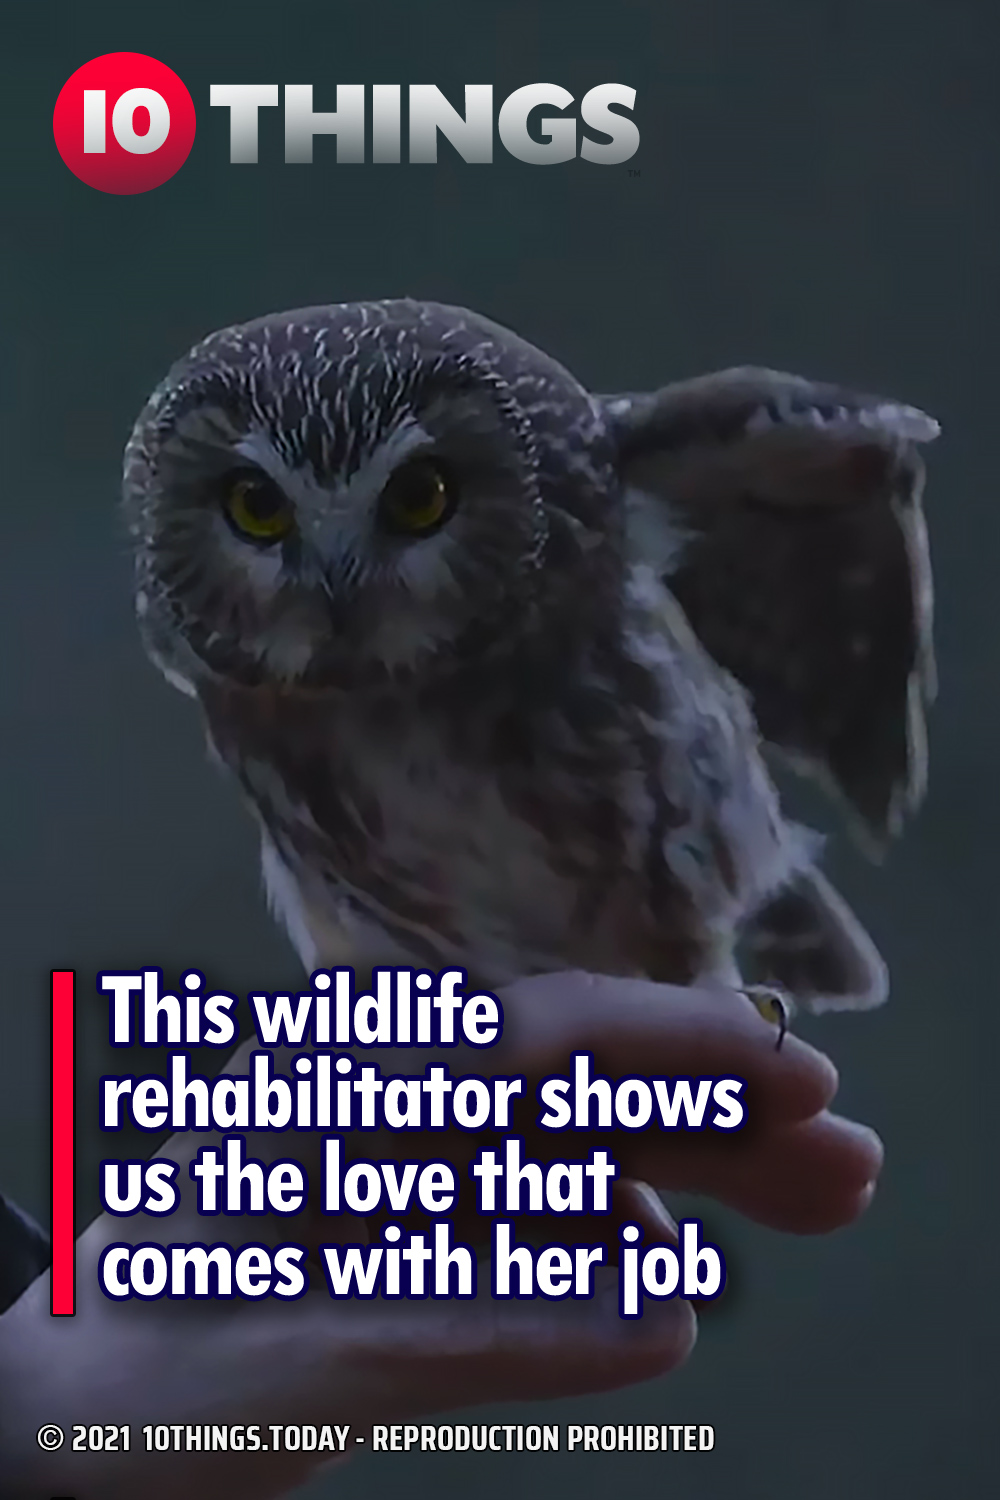 This wildlife rehabilitator shows us the love that comes with her job